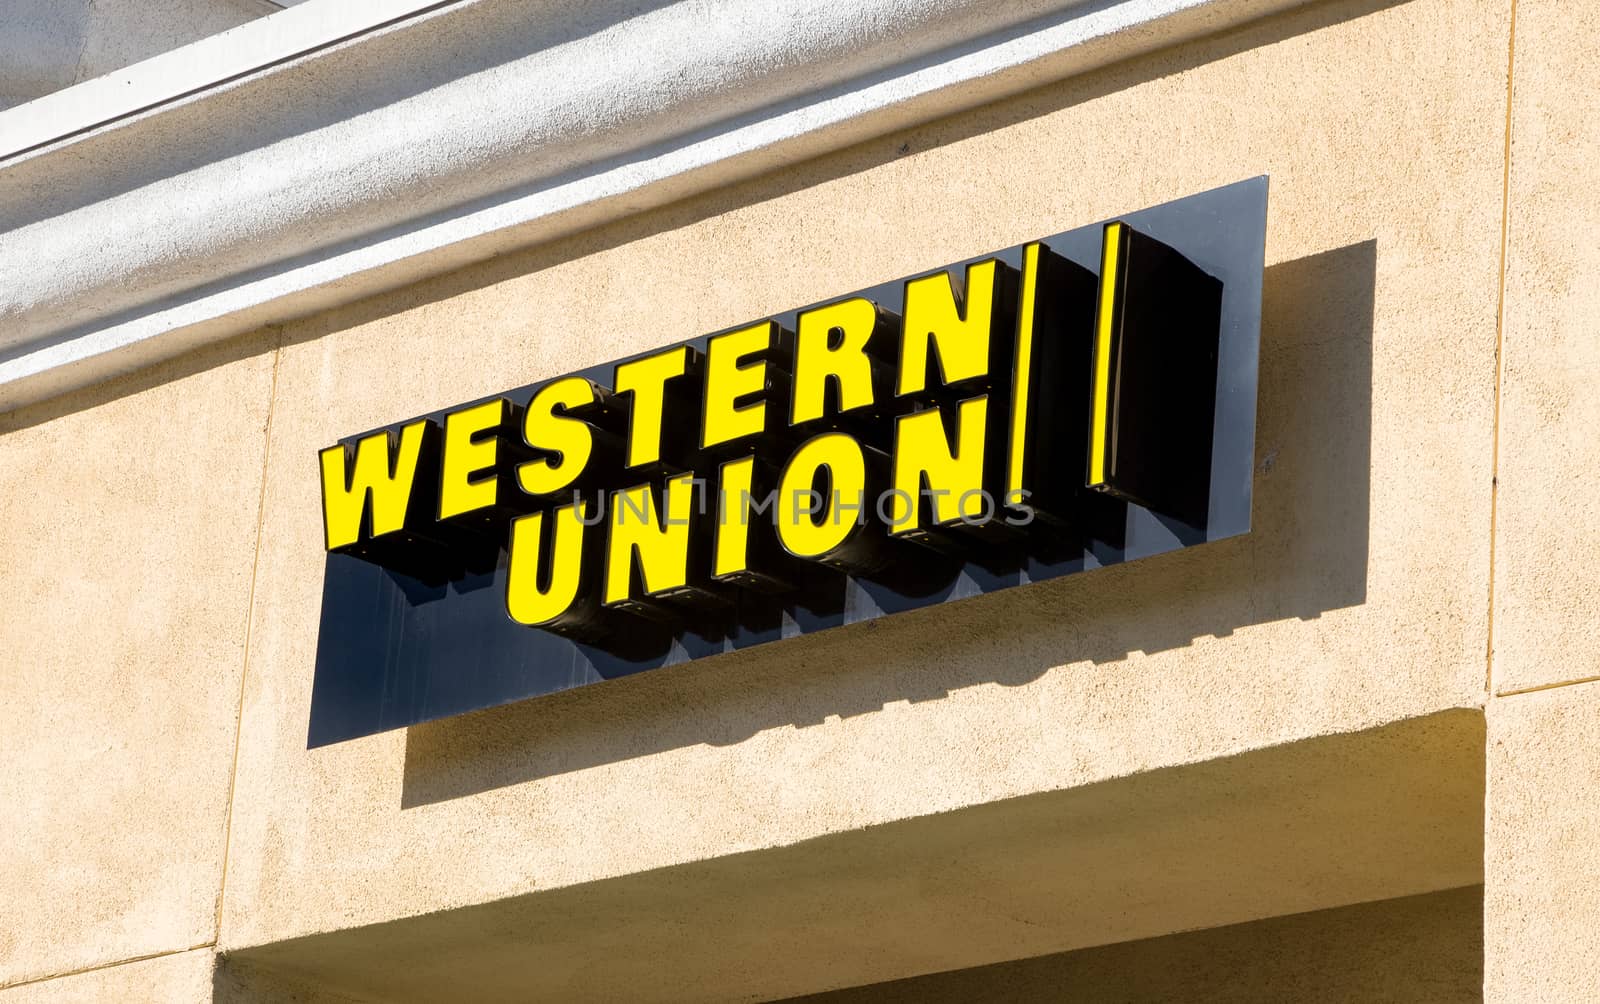 ARCADIA, CA/USA - NOVEMBER 22, 2015: Western Union sign and logo. The Western Union Company is an American financial services and communications company.